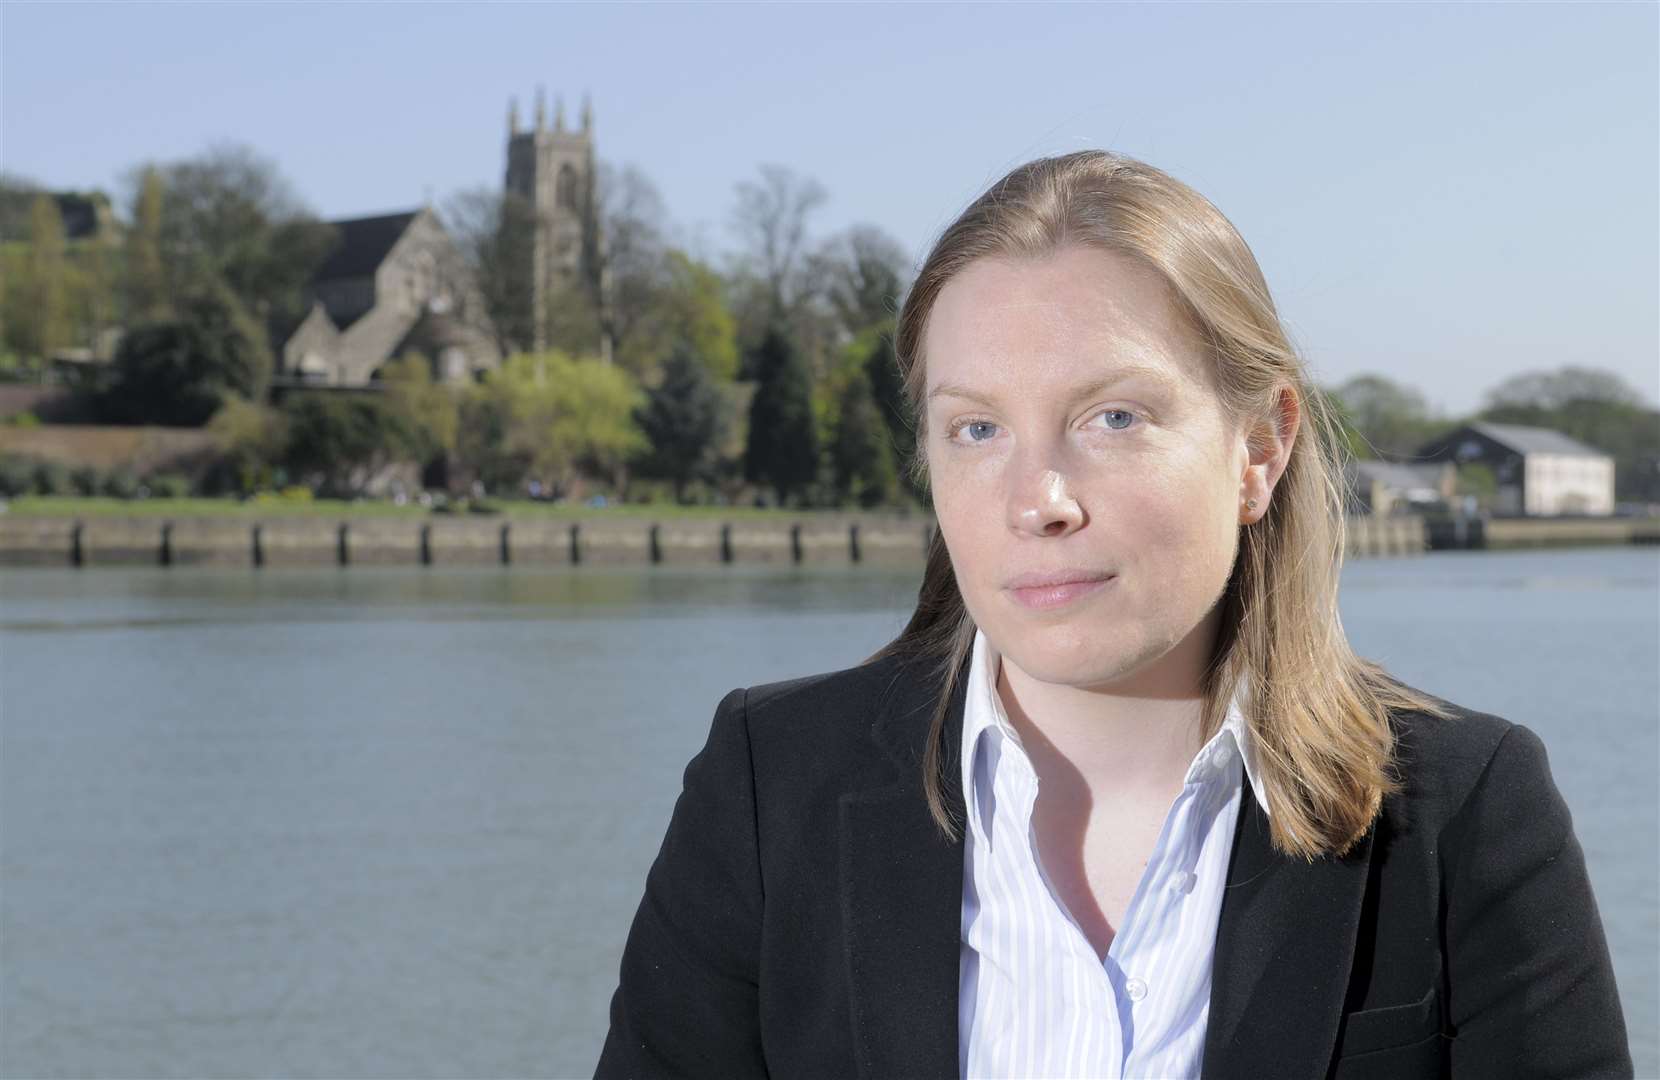 Tracey Crouch, MP for Chatham and Aylesford, hopes to close an abuse of trust loophole for sports coaches. Picture: Andy Payton